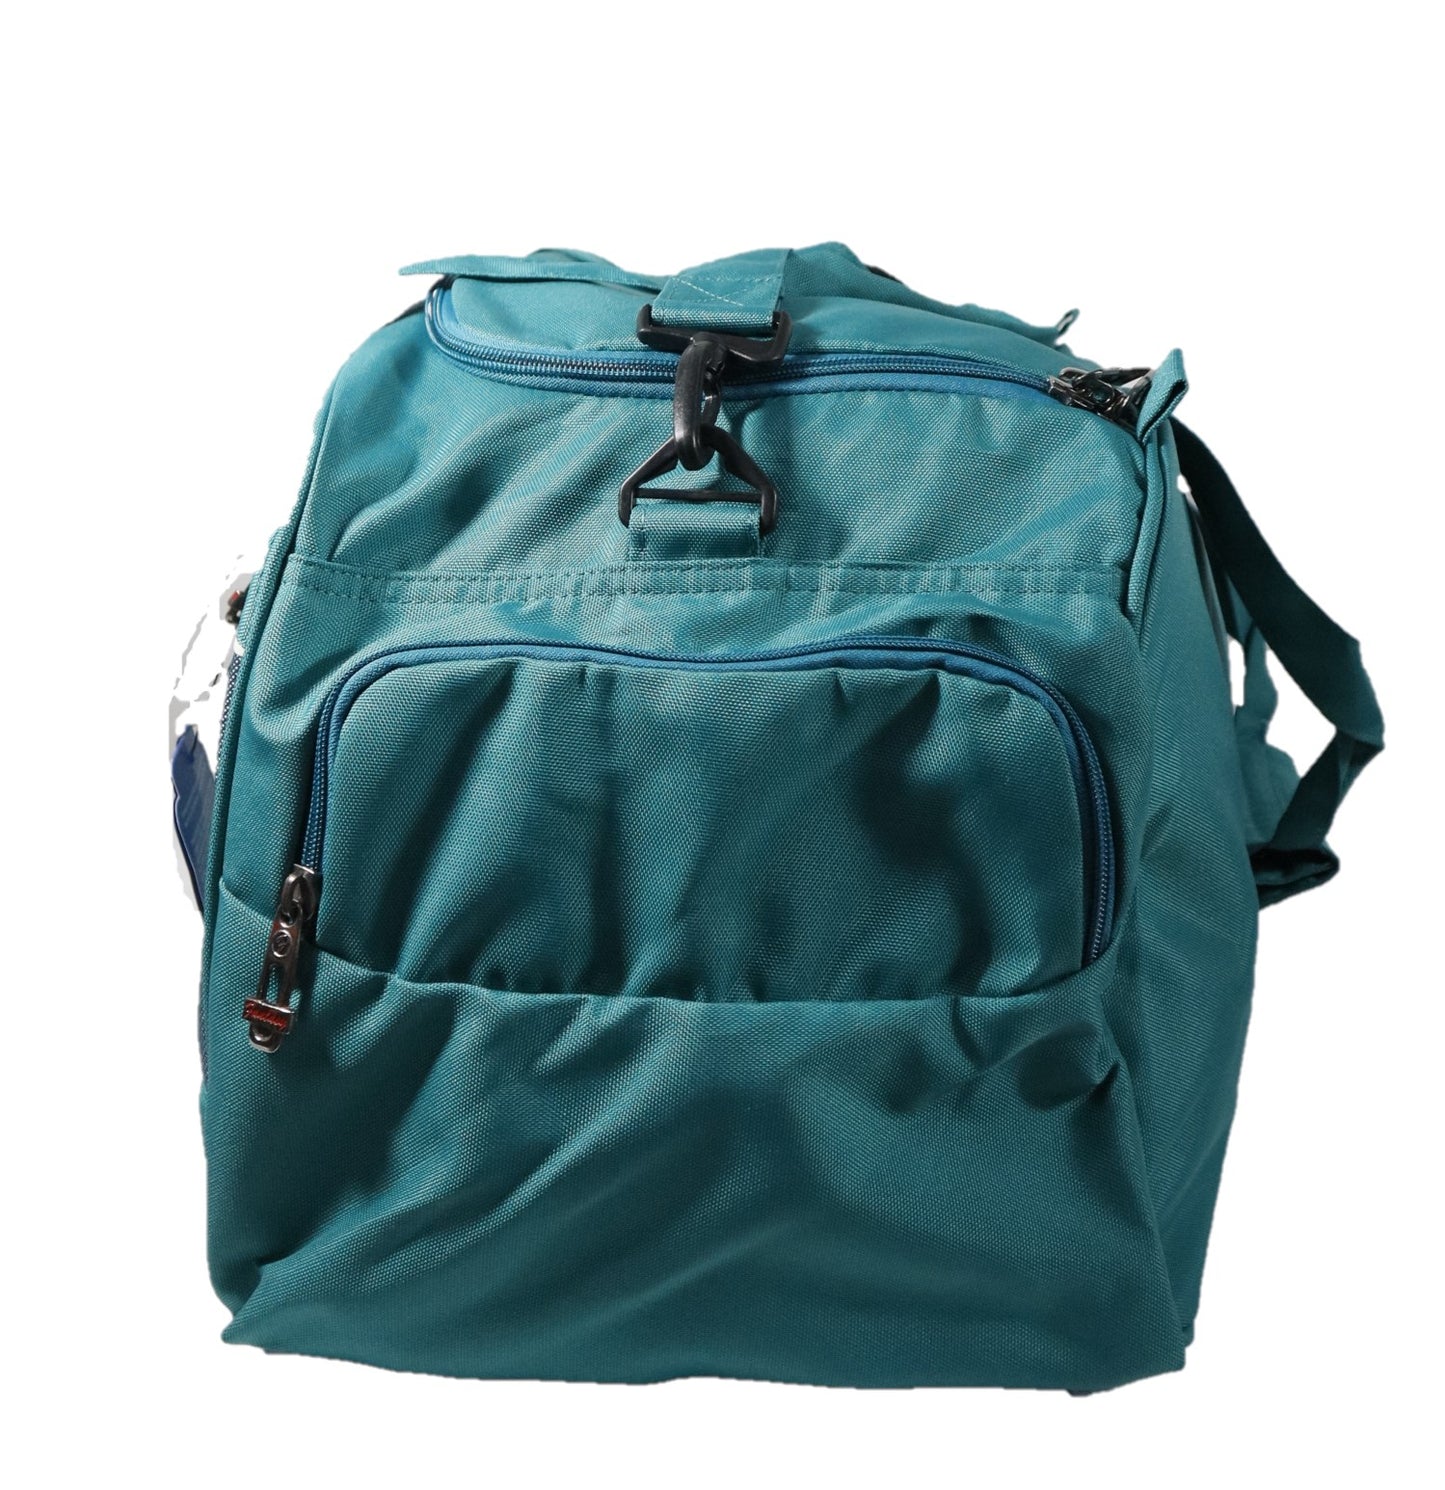 he movable shoulder pad ensures comfort while the wide opening and front pocket provide quick access to your items